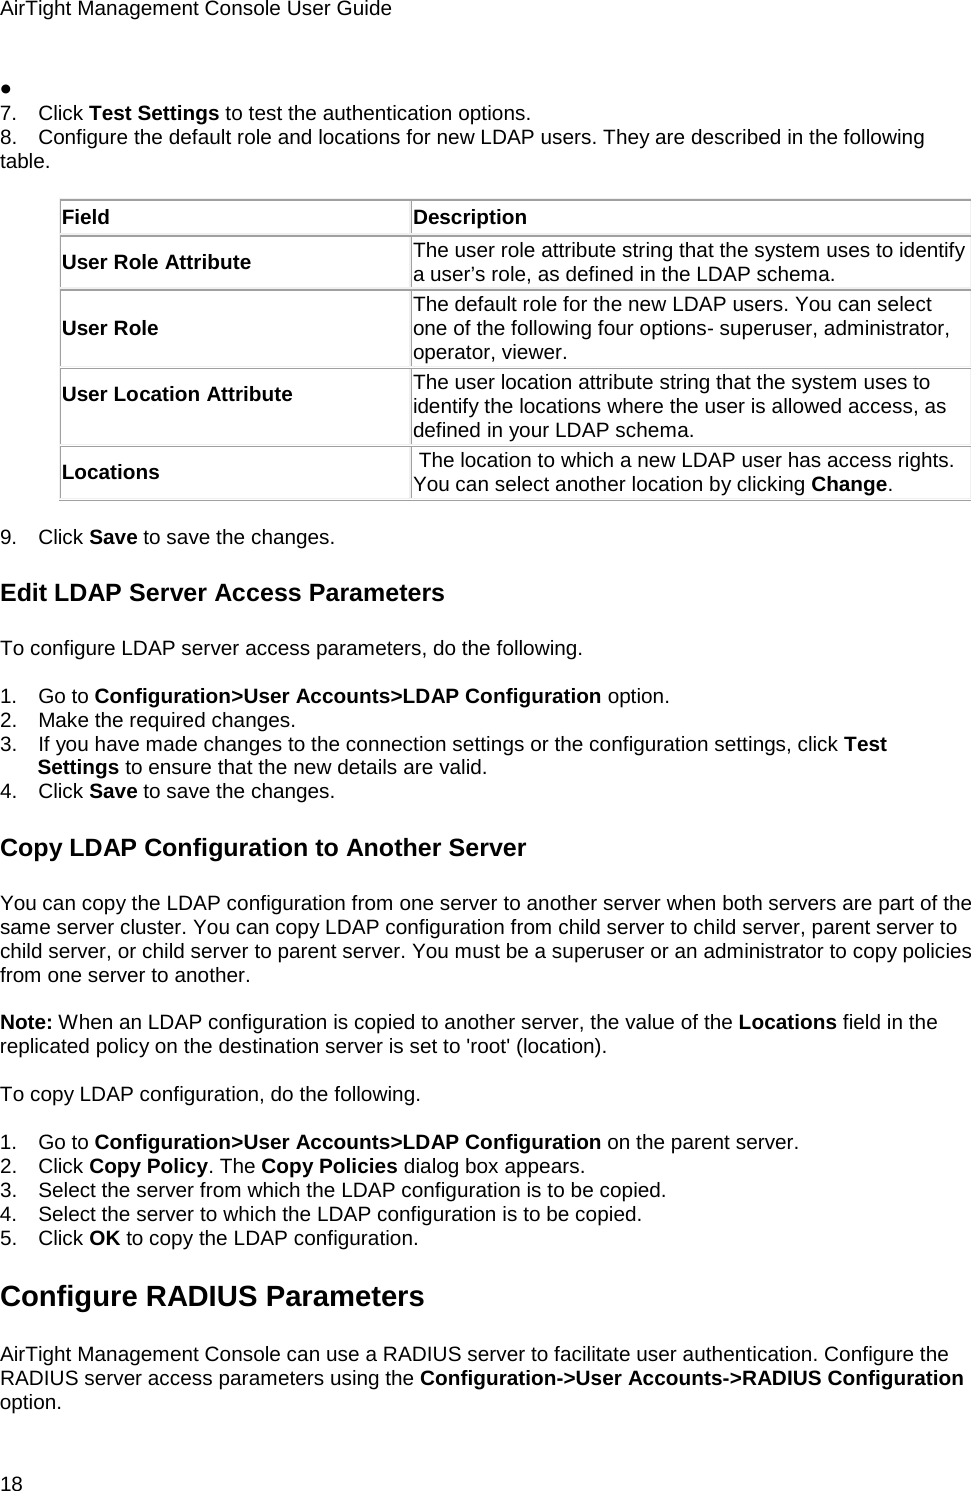 AirTight Management Console User Guide 18 •    7.      Click Test Settings to test the authentication options. 8.      Configure the default role and locations for new LDAP users. They are described in the following table.   Field Description User Role Attribute The user role attribute string that the system uses to identify a user’s role, as defined in the LDAP schema. User Role The default role for the new LDAP users. You can select one of the following four options- superuser, administrator, operator, viewer. User Location Attribute   The user location attribute string that the system uses to identify the locations where the user is allowed access, as defined in your LDAP schema. Locations  The location to which a new LDAP user has access rights. You can select another location by clicking Change.   9.      Click Save to save the changes. Edit LDAP Server Access Parameters To configure LDAP server access parameters, do the following.   1.      Go to Configuration&gt;User Accounts&gt;LDAP Configuration option. 2.      Make the required changes. 3.      If you have made changes to the connection settings or the configuration settings, click Test Settings to ensure that the new details are valid. 4.      Click Save to save the changes. Copy LDAP Configuration to Another Server You can copy the LDAP configuration from one server to another server when both servers are part of the same server cluster. You can copy LDAP configuration from child server to child server, parent server to child server, or child server to parent server. You must be a superuser or an administrator to copy policies from one server to another.   Note: When an LDAP configuration is copied to another server, the value of the Locations field in the replicated policy on the destination server is set to &apos;root&apos; (location).   To copy LDAP configuration, do the following.   1.      Go to Configuration&gt;User Accounts&gt;LDAP Configuration on the parent server. 2.      Click Copy Policy. The Copy Policies dialog box appears. 3.      Select the server from which the LDAP configuration is to be copied. 4.      Select the server to which the LDAP configuration is to be copied. 5.      Click OK to copy the LDAP configuration. Configure RADIUS Parameters AirTight Management Console can use a RADIUS server to facilitate user authentication. Configure the RADIUS server access parameters using the Configuration-&gt;User Accounts-&gt;RADIUS Configuration option. 